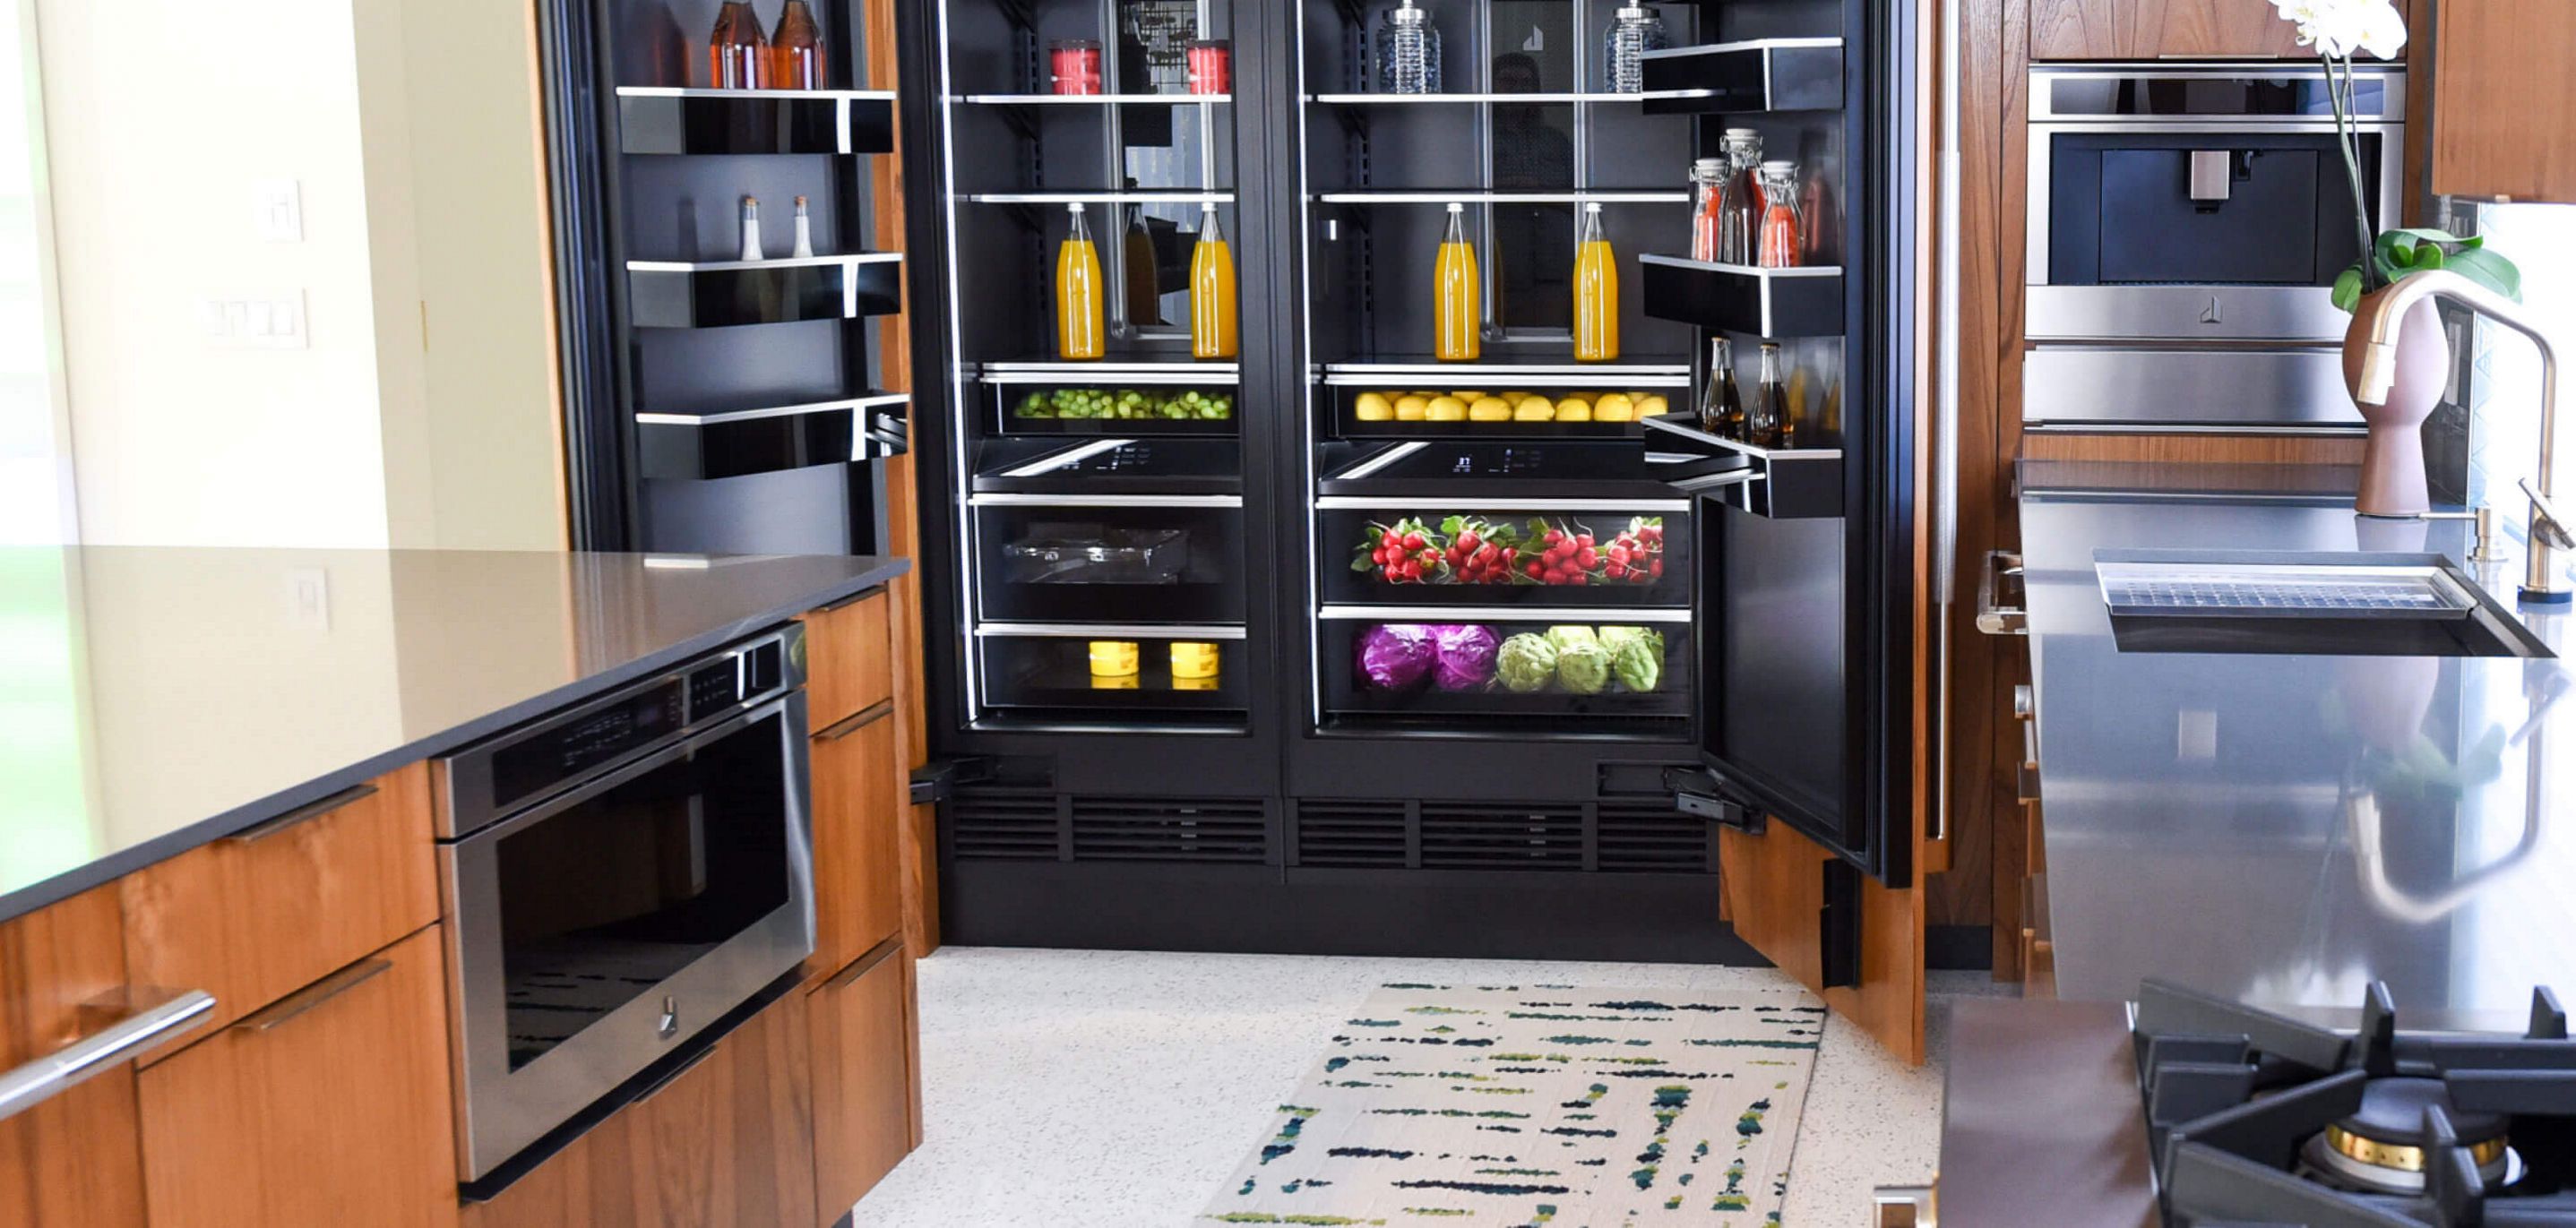 A modern JennAir® kitchen in a home, with a stocked open refrigerator.